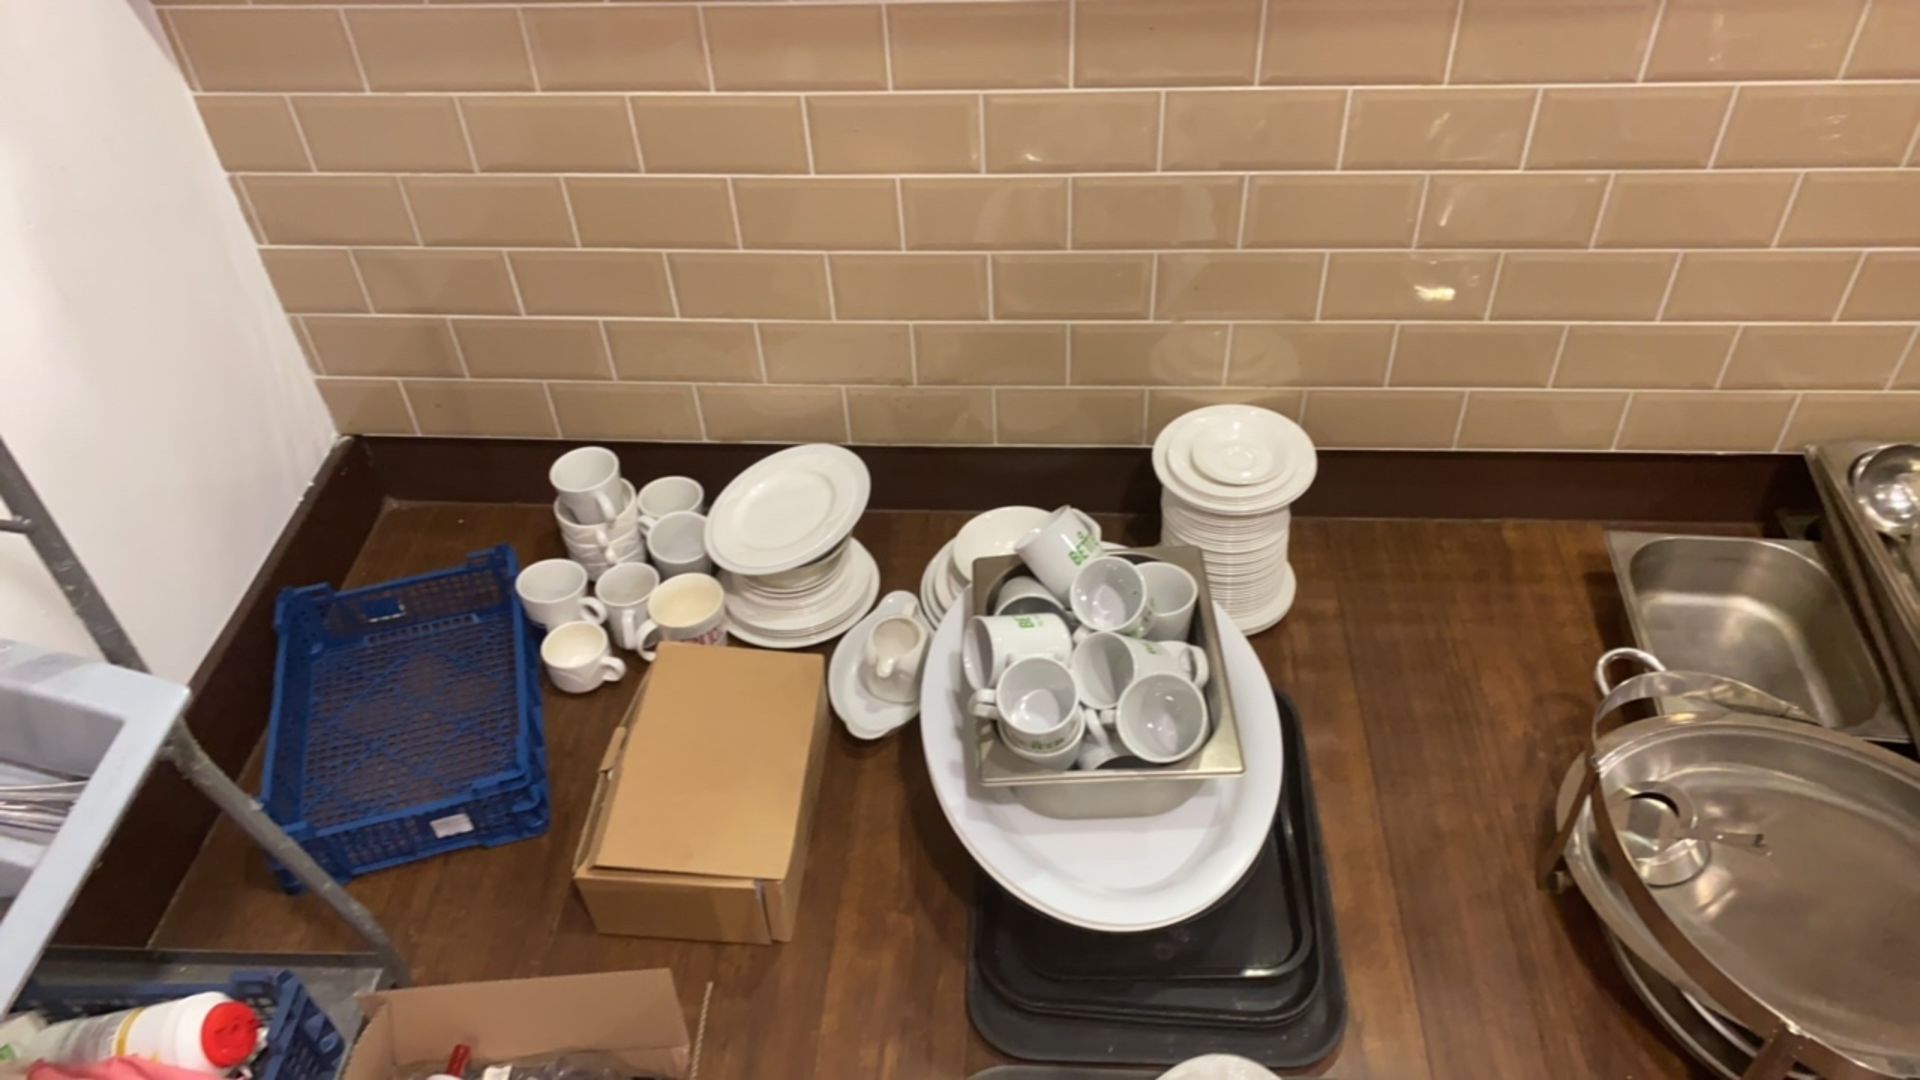 Mixed front of house crockery and plastics - Image 2 of 6